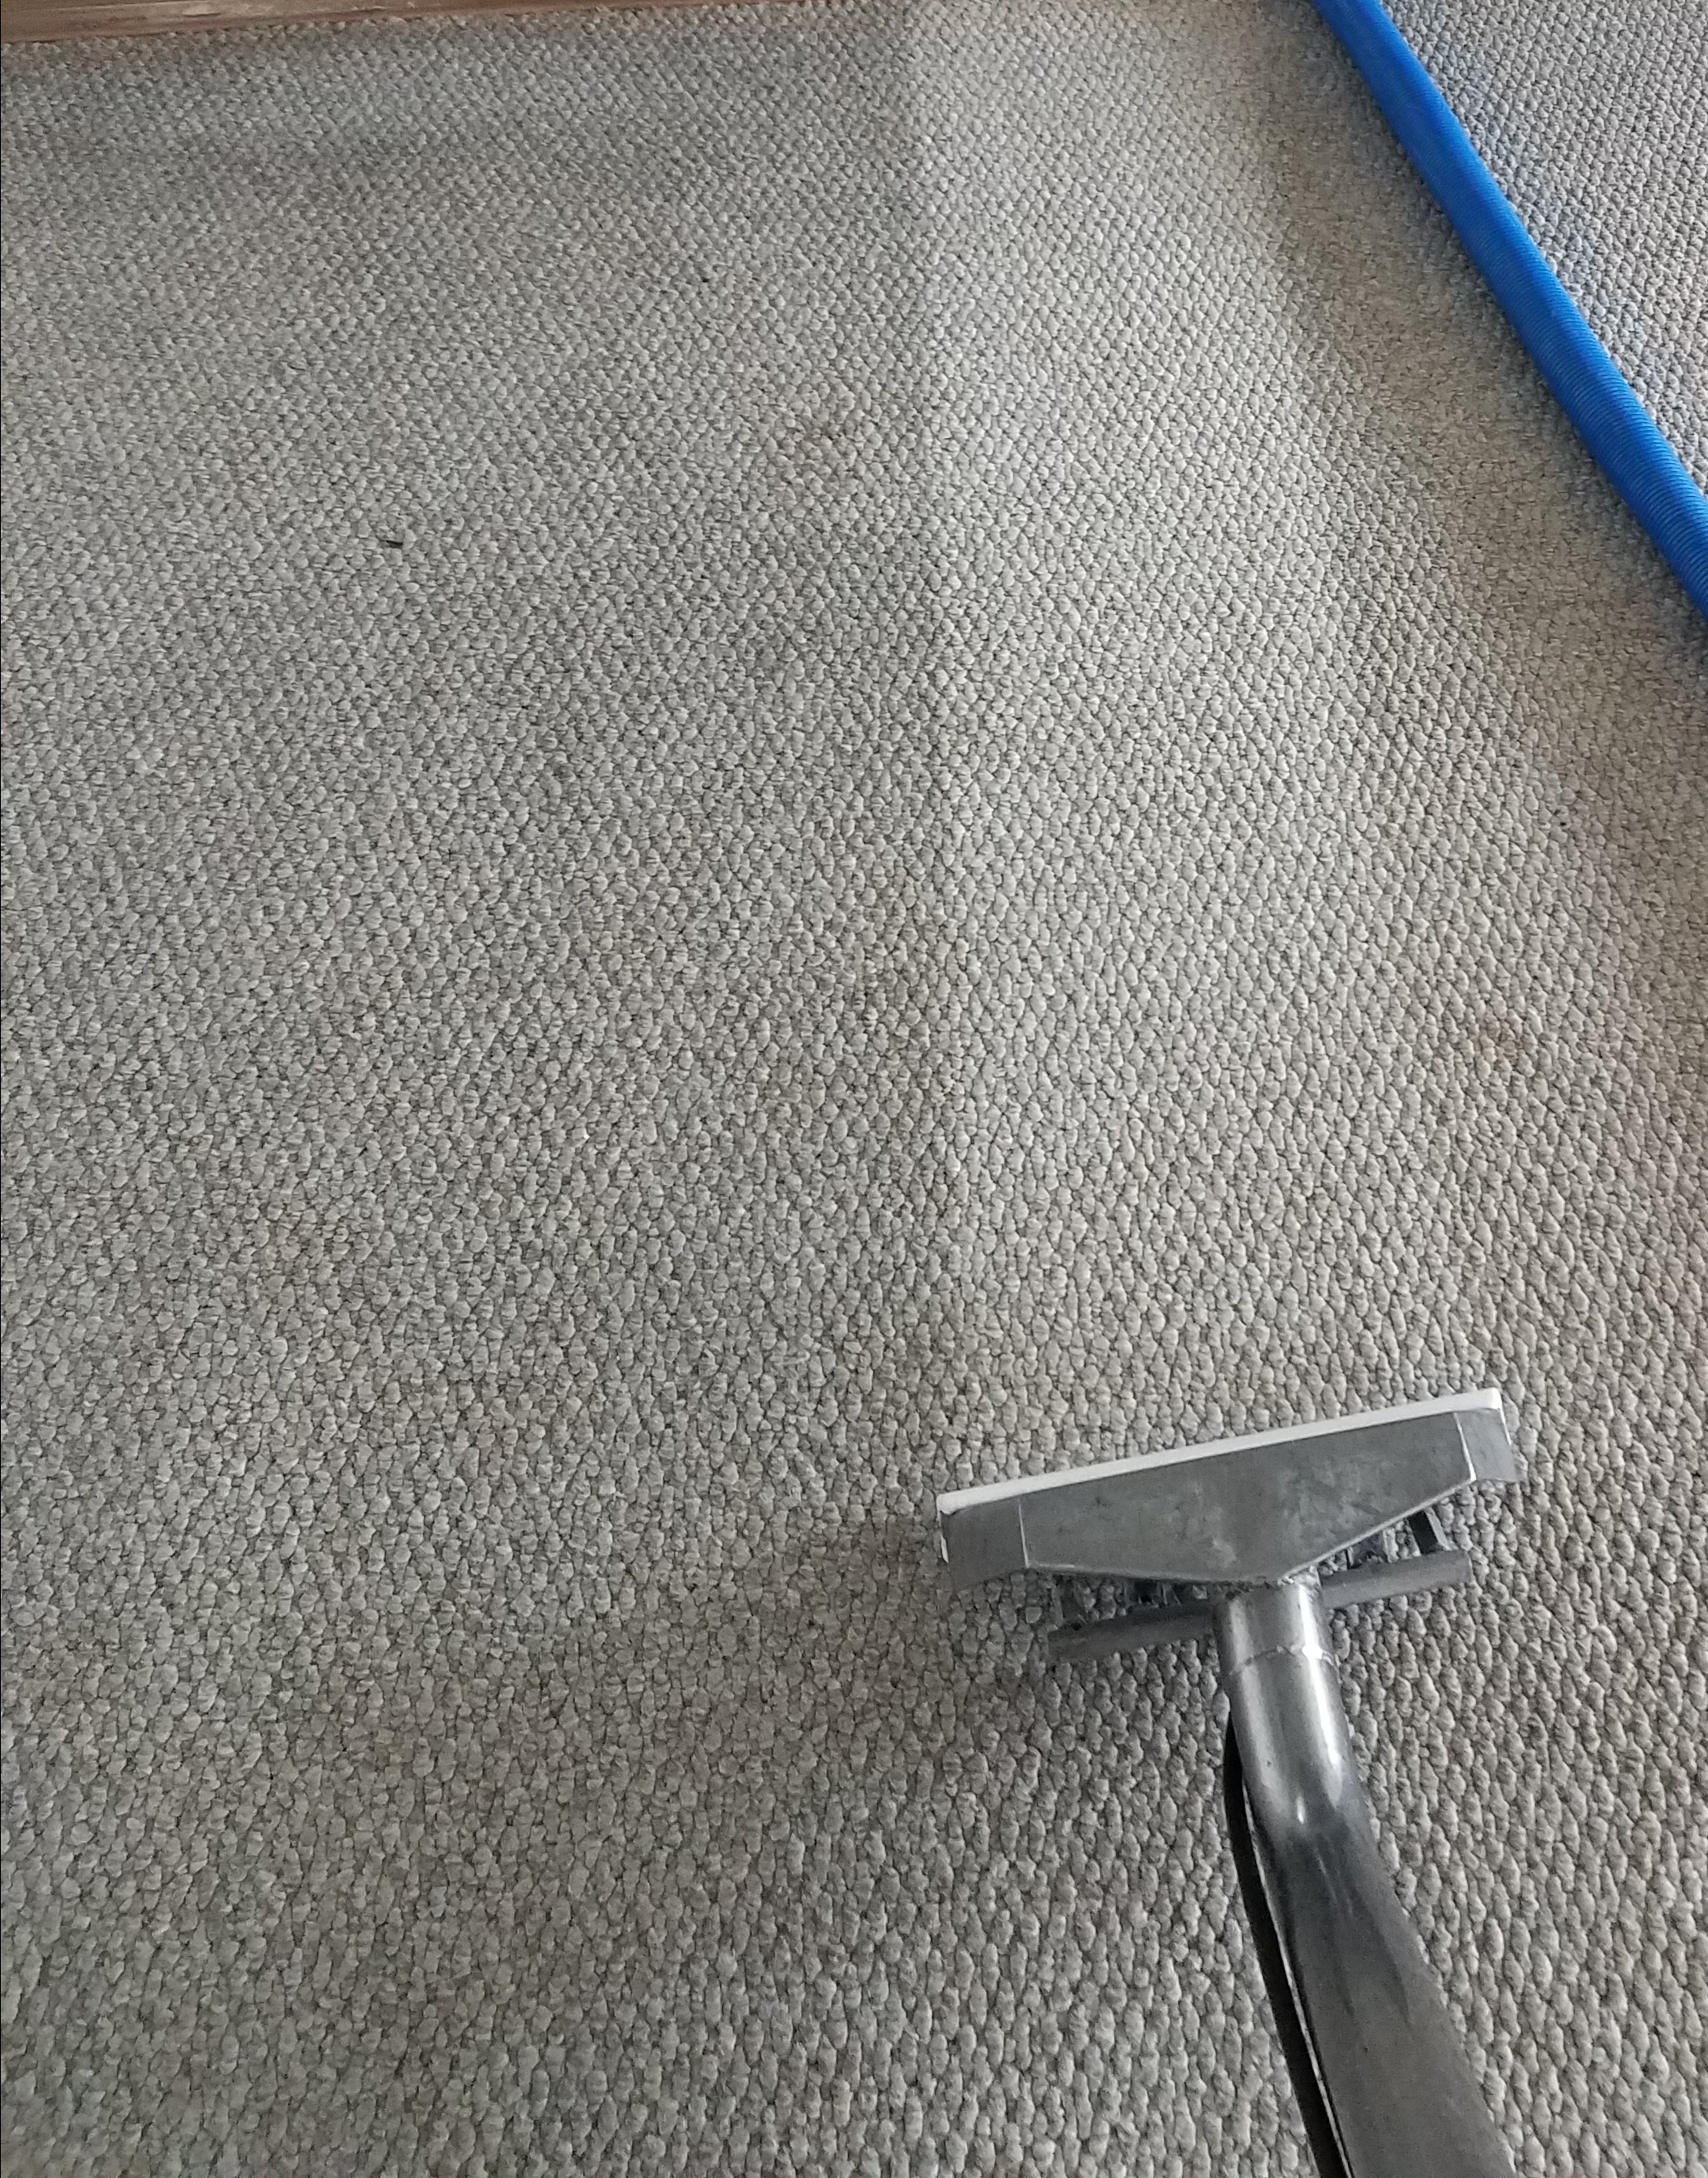 Carpet cleaning wand